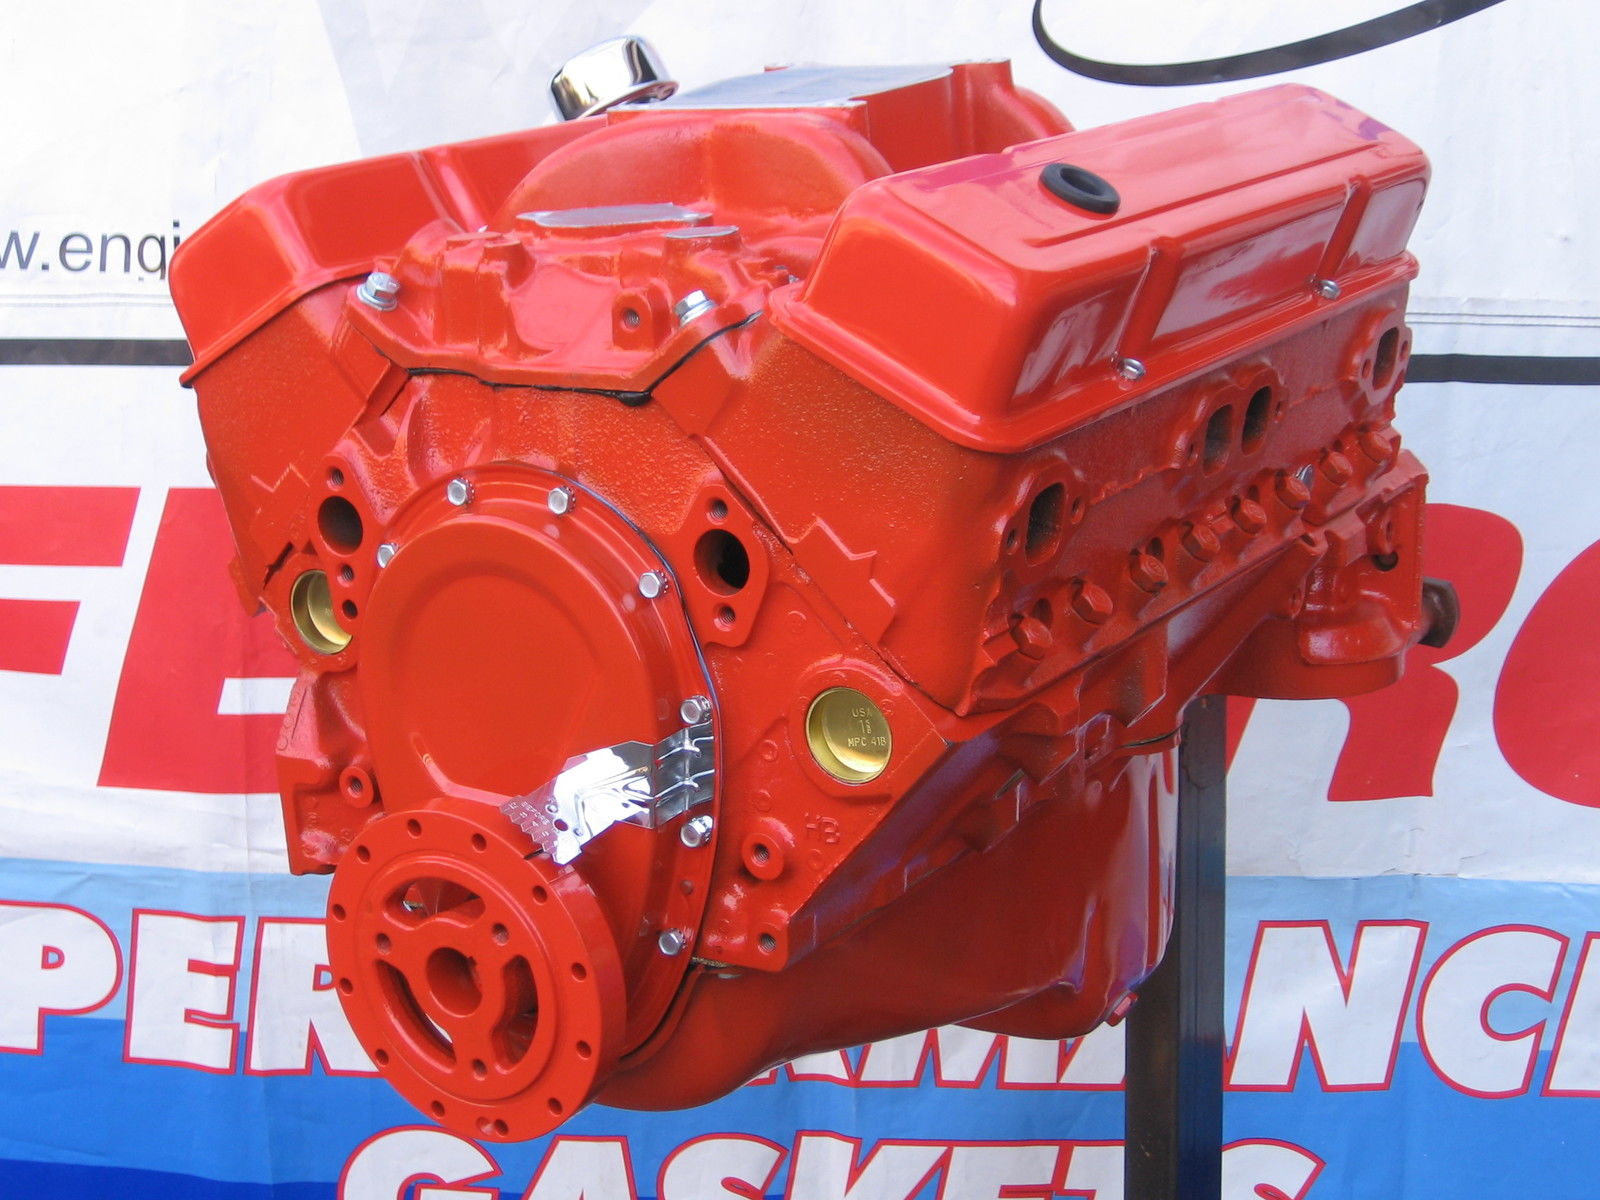 Chevy 283 / 280 HP High Performance Balanced Crate Engine - Five